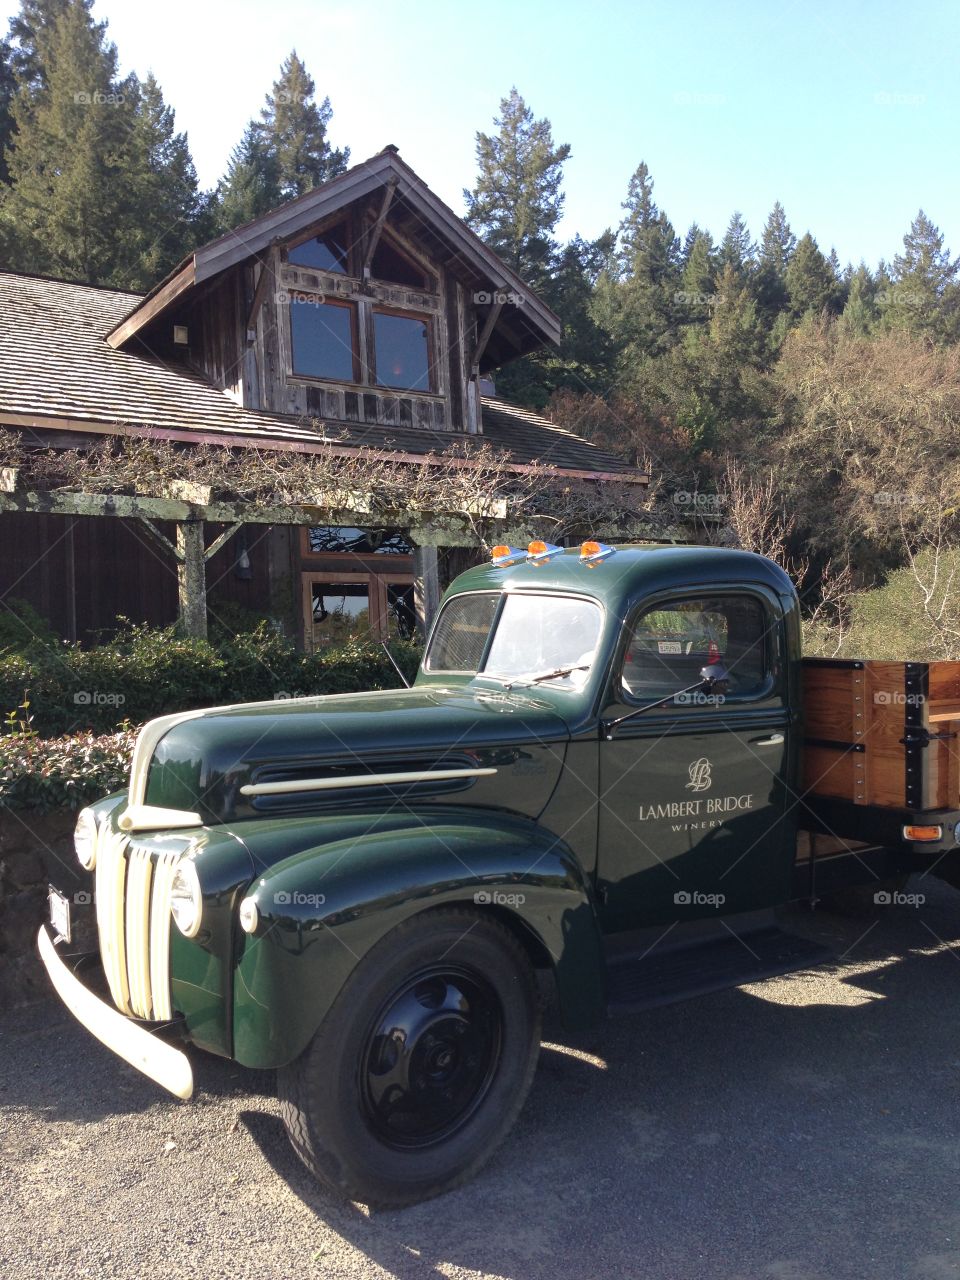 Old Truck in Country. Wine Country Truck in Sonona